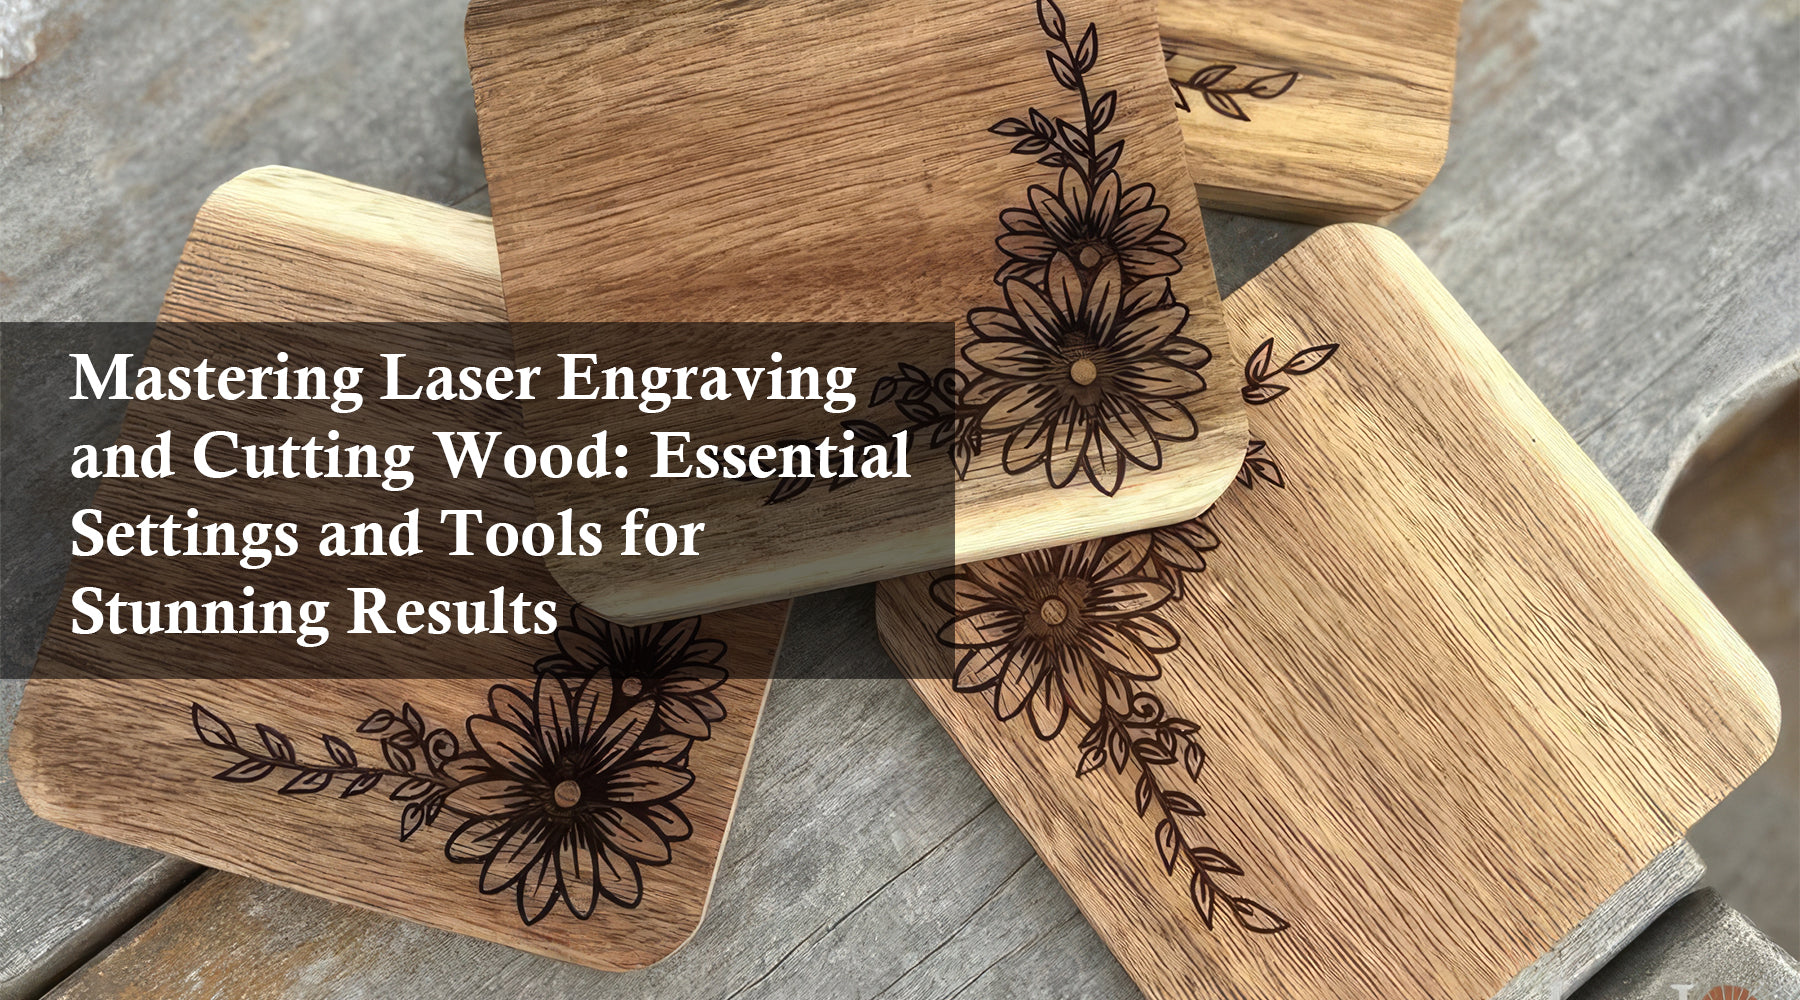 Mastering Laser Engraving and Cutting Wood: Essential Settings and Tools for Stunning Results